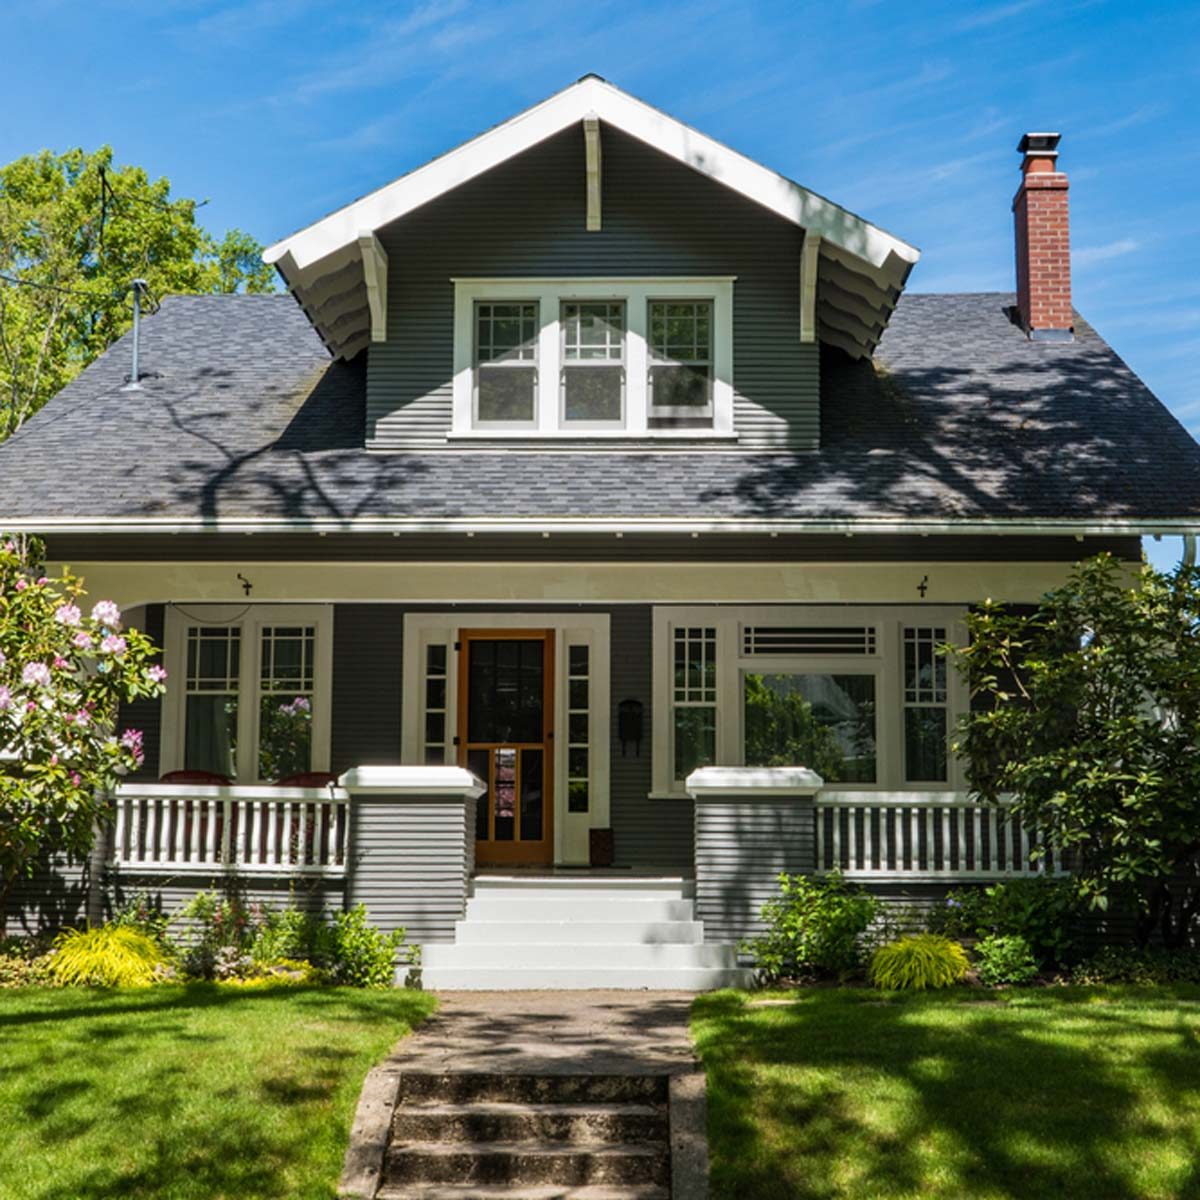 The Top  6 Most  Popular  Architectural  Home  Styles  in the U S 